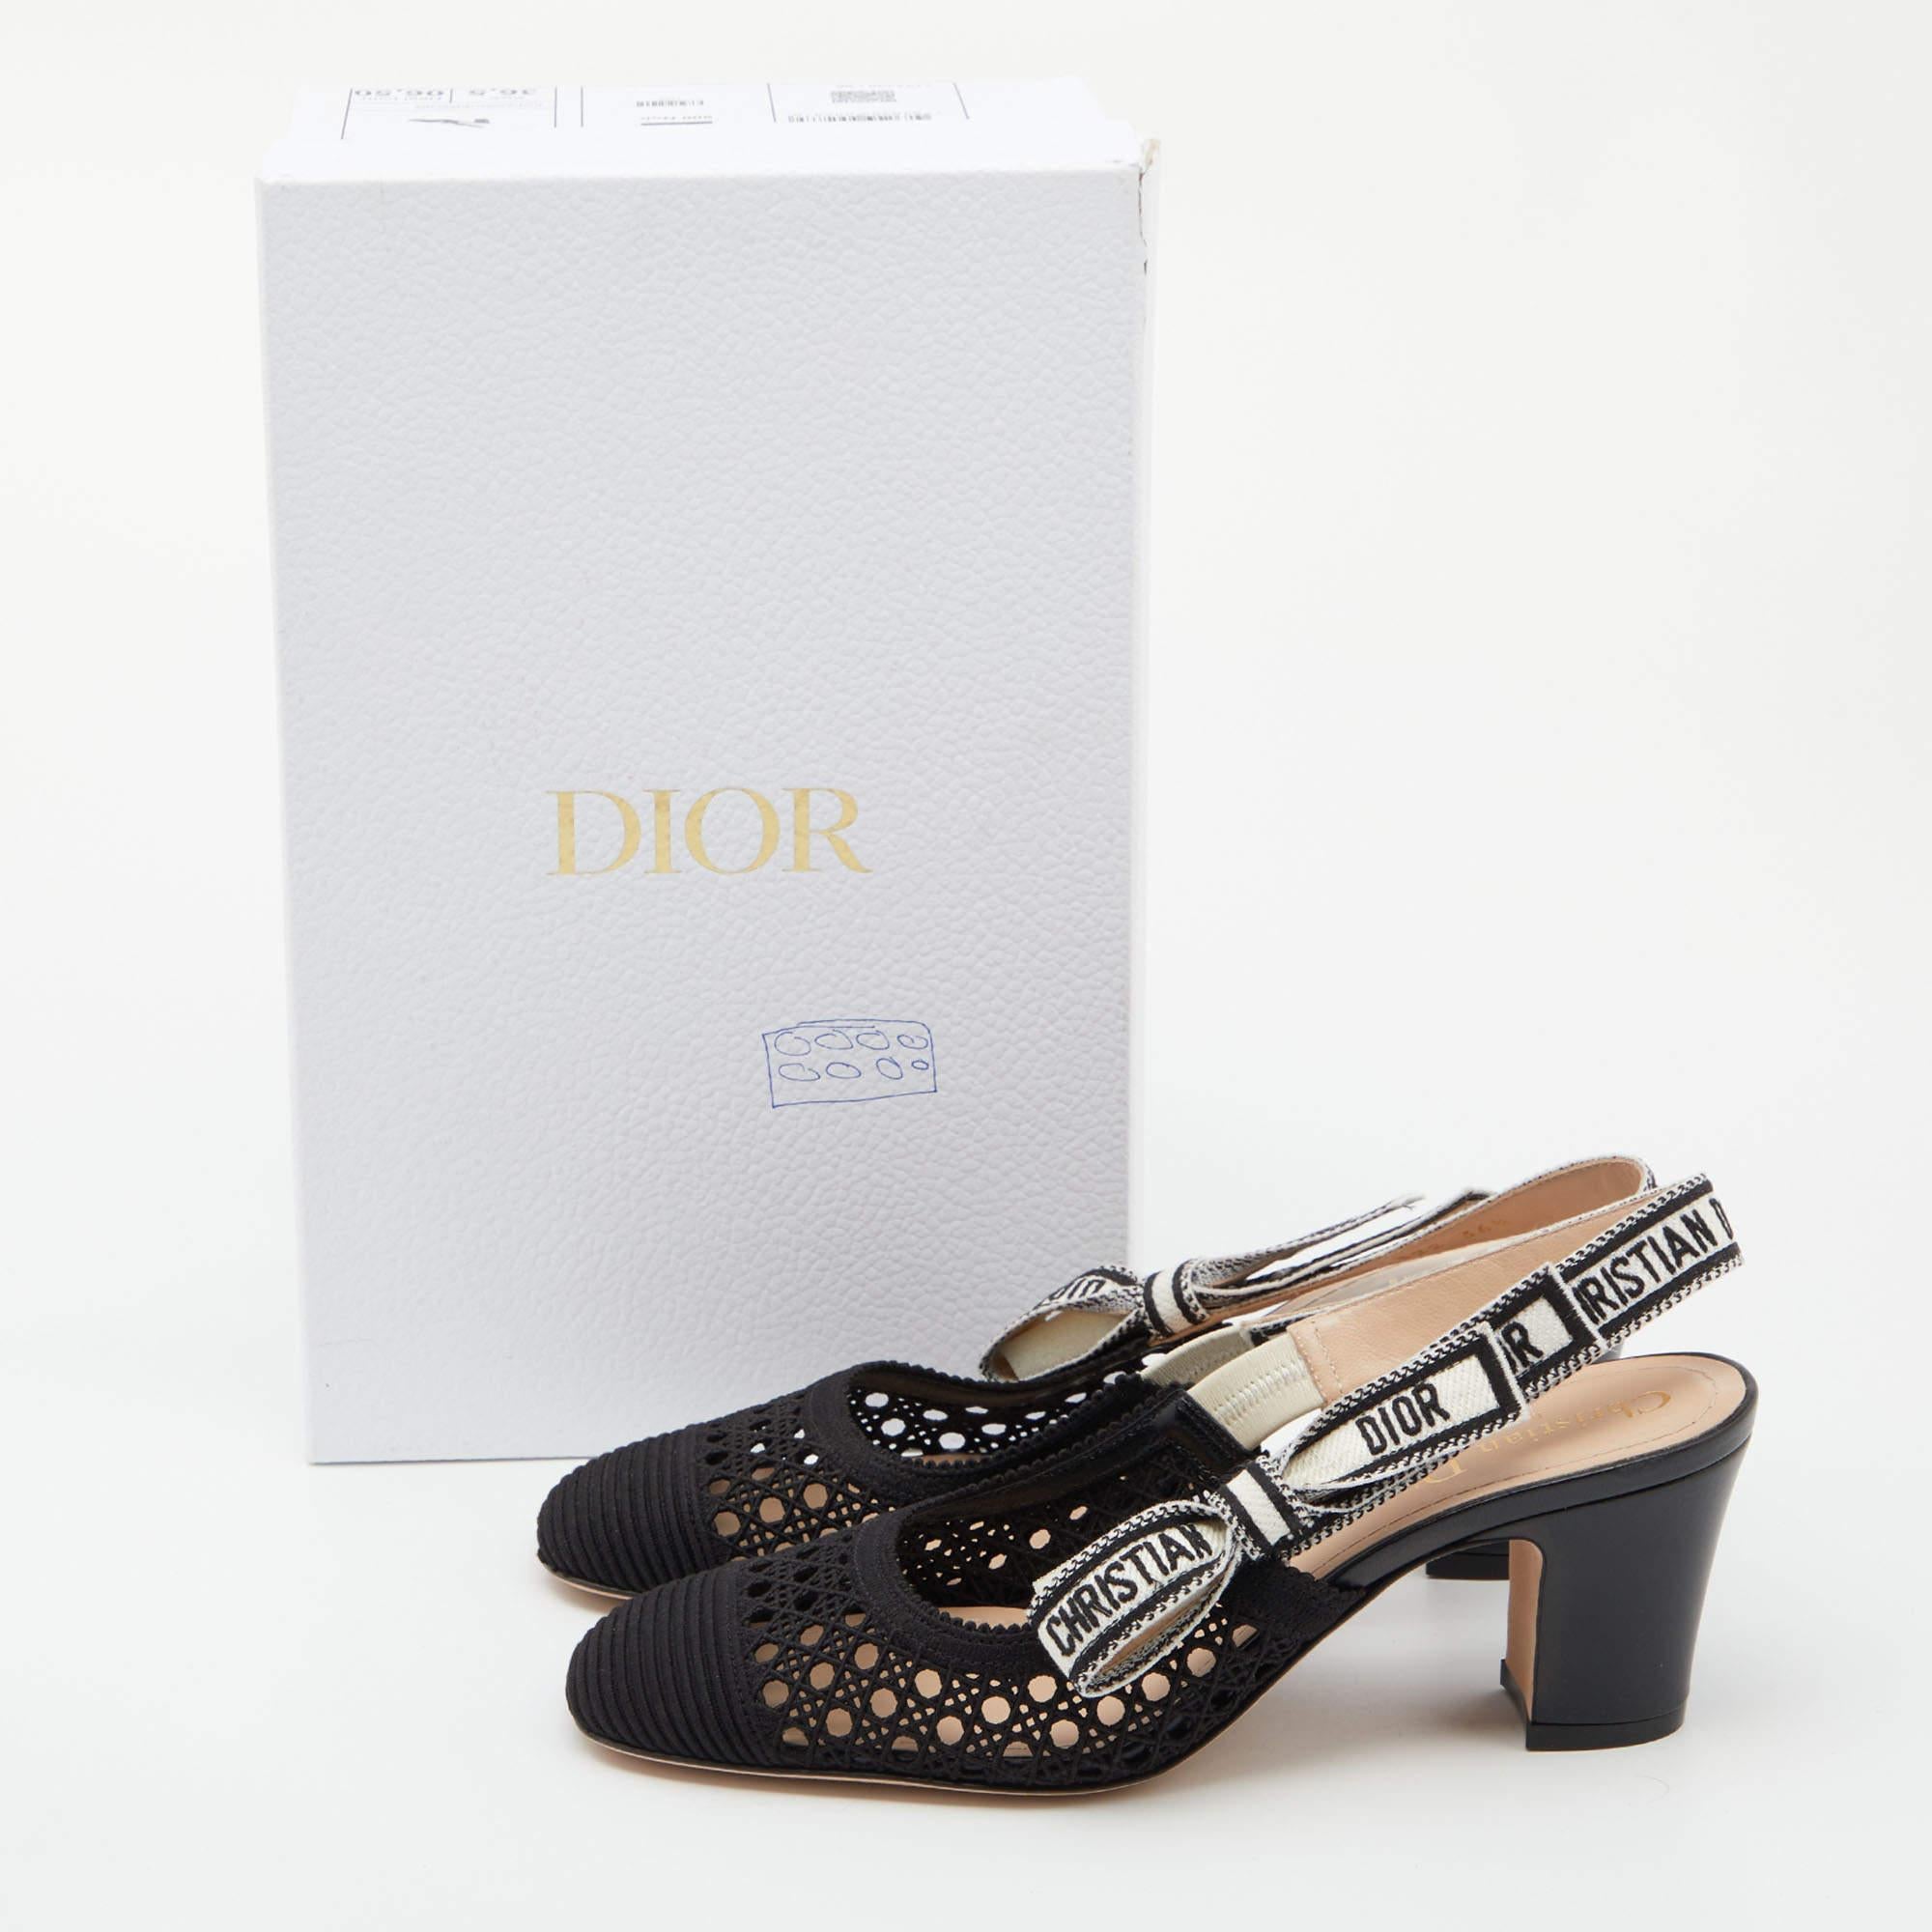 Dior Black Fabric and Leather Moi Block Heel Slingback Sandals Size 36.5 3